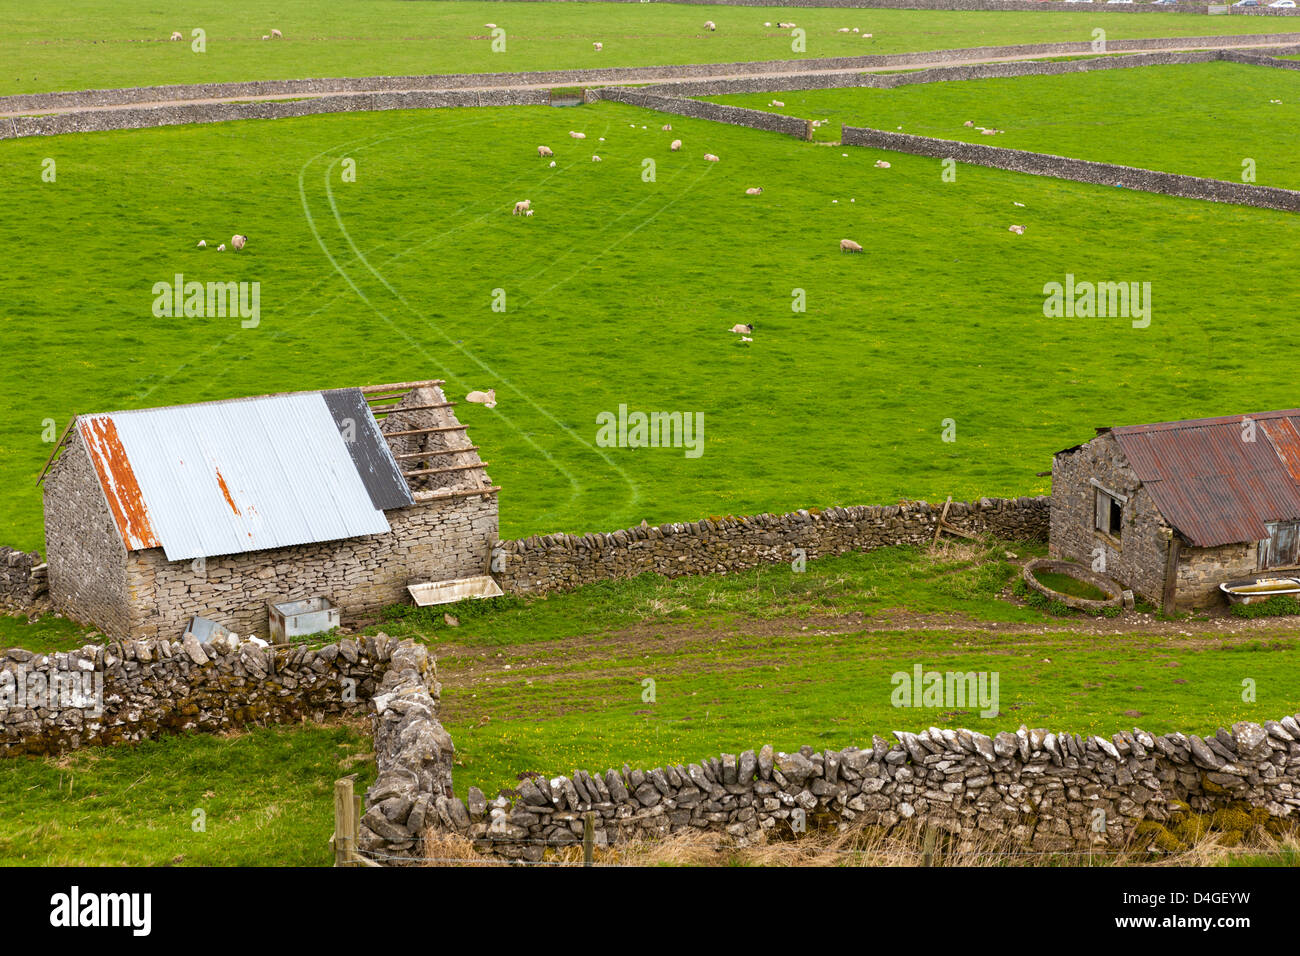 Dry stone walls overlooking fields in the Peak District National Park, Castleton, Derbyshire, England, UK, Europe. Stock Photo